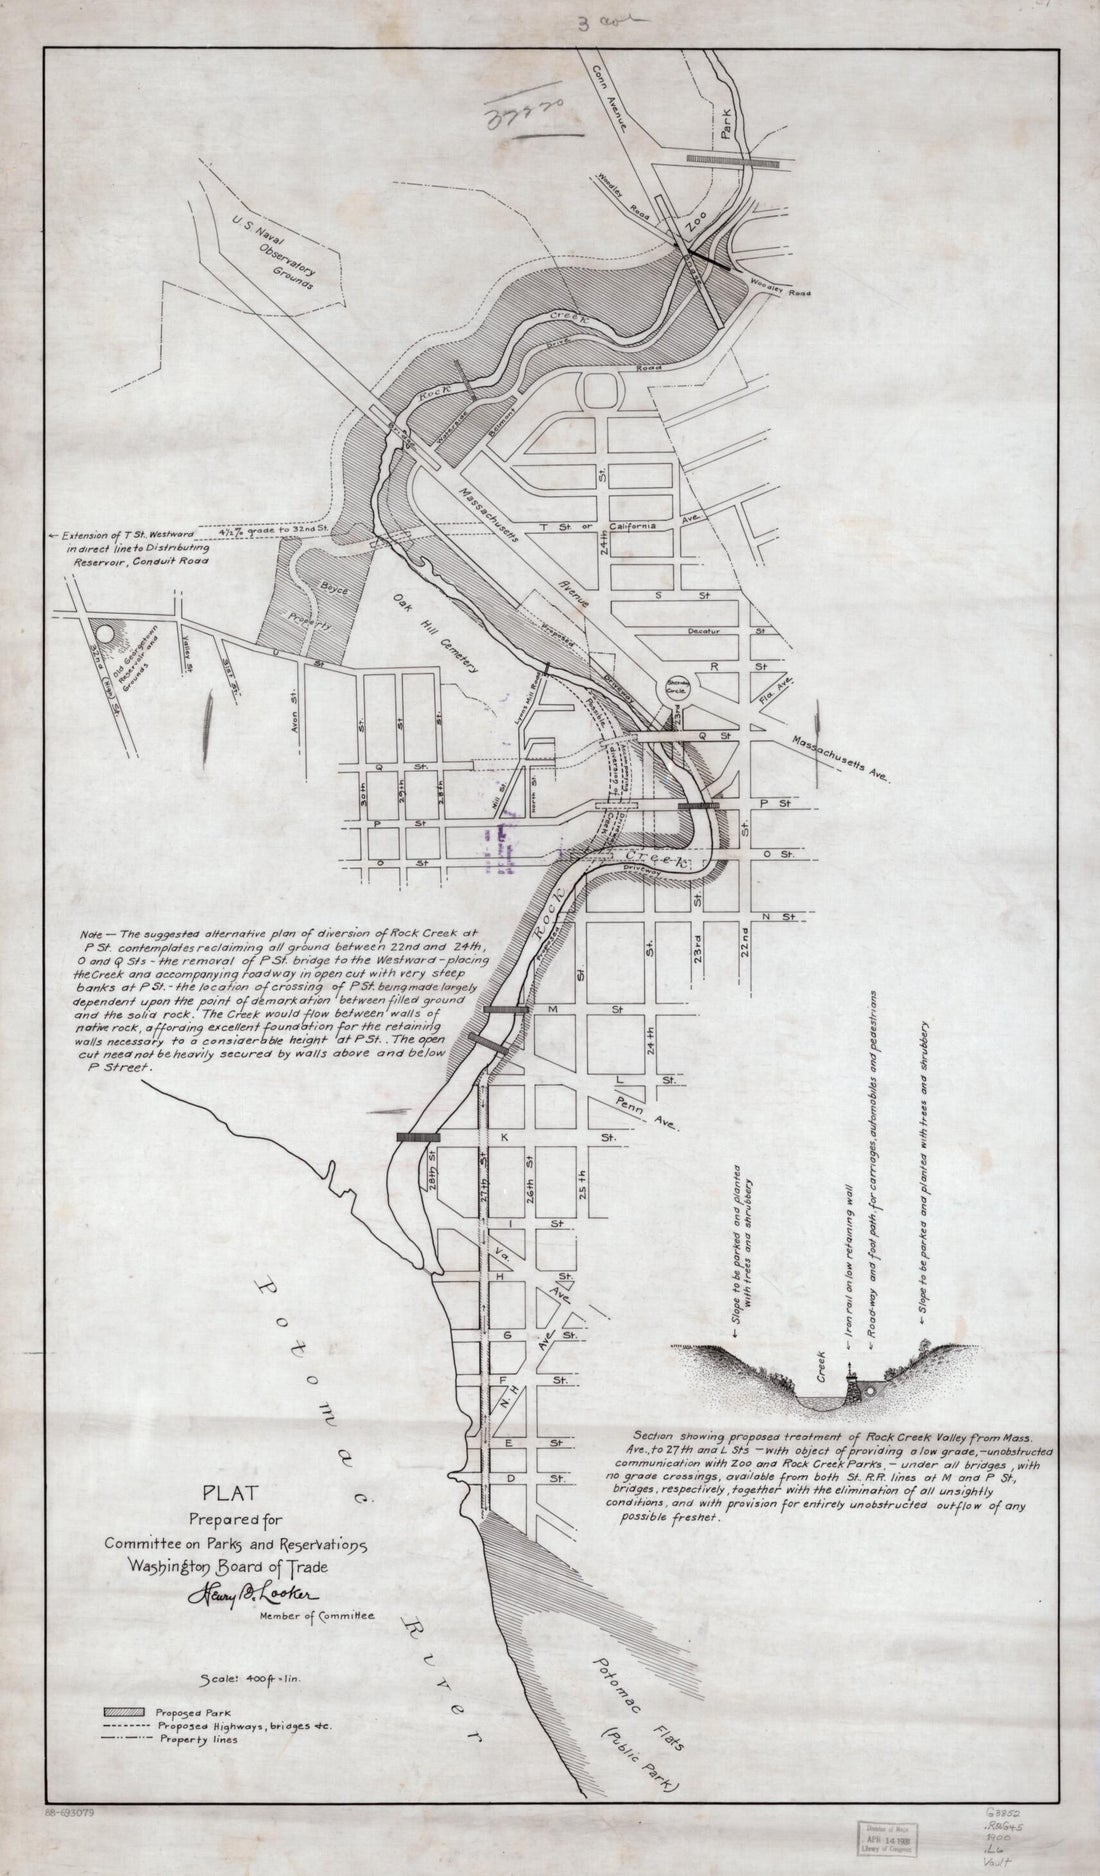 This old map of Plat Prepared for Committee On Parks and Reservations, Washington Board of Trade : Rock Creek and Potomac Parkway, Washington D.C. from 1900 was created by Henry B. Looker,  Washington Board of Trade. Committee on Parks and Reservations i